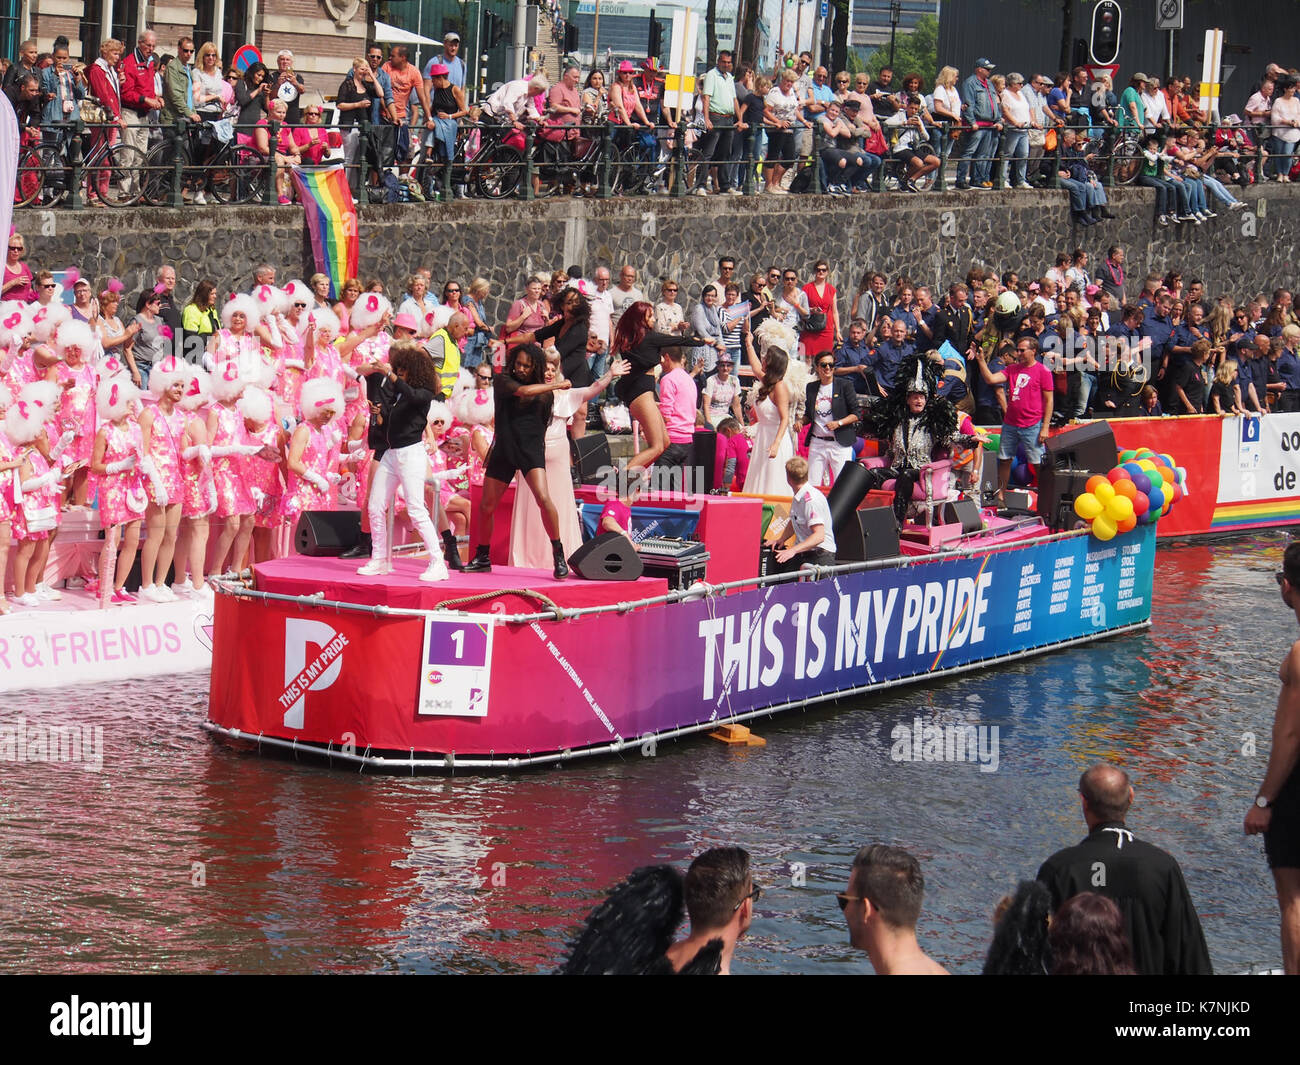 Boat 1 This is my pride, Canal Parade Amsterdam 2017 foto 1 Stock Photo